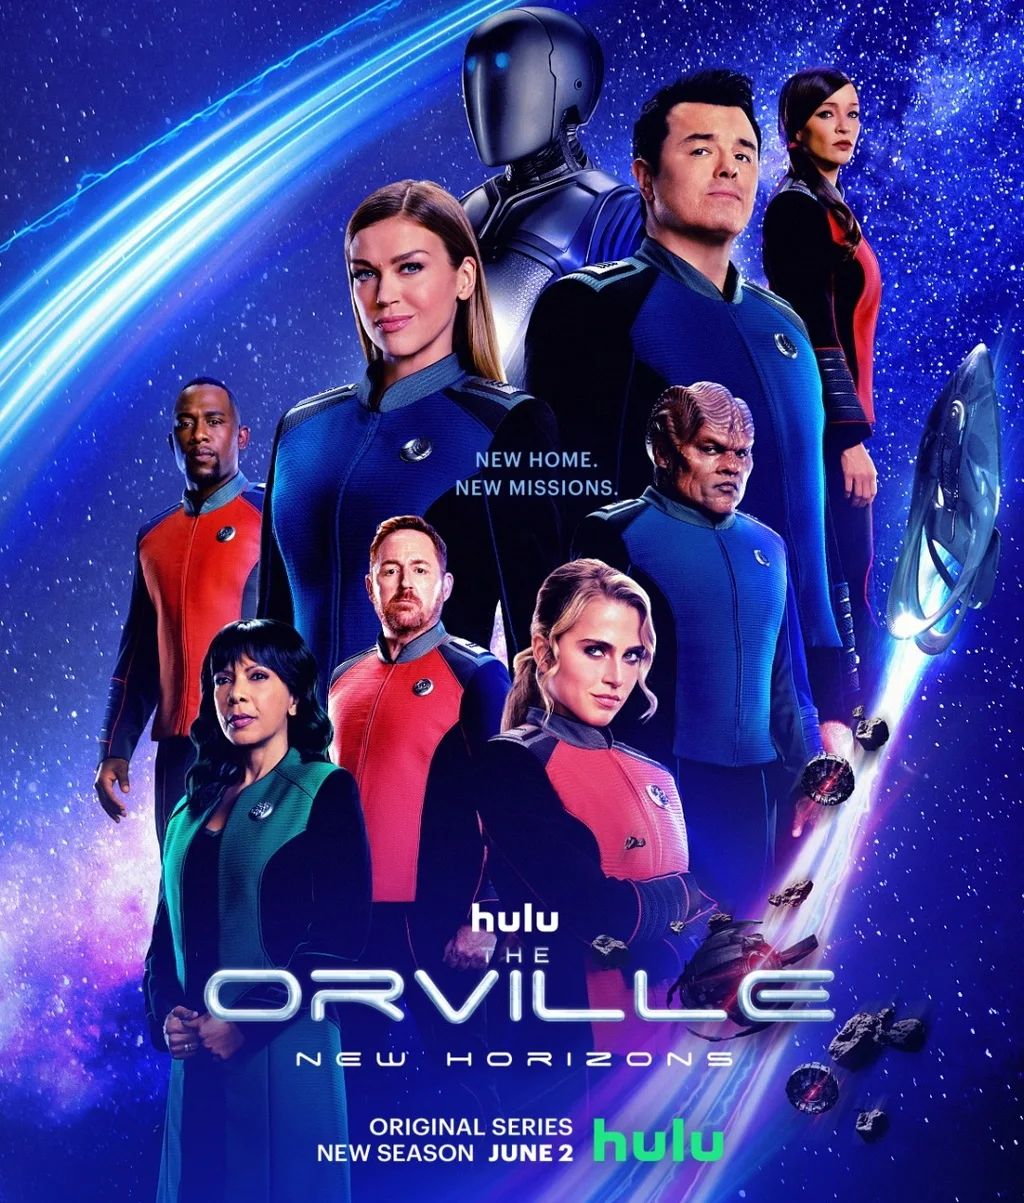 THE ORVILLE CAST